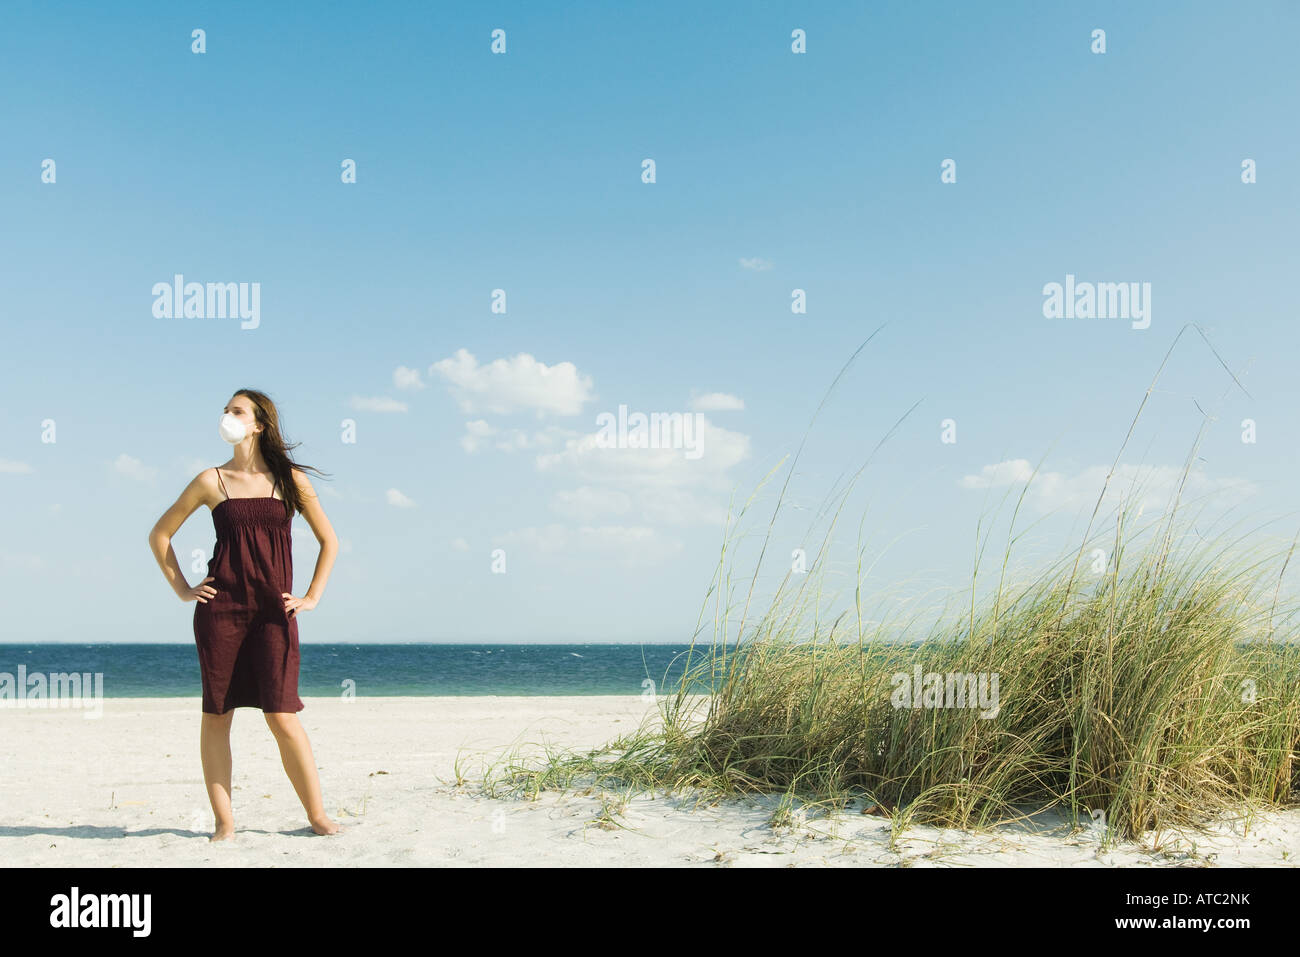 Woman standing on beach, wearing pollution mask Stock Photo